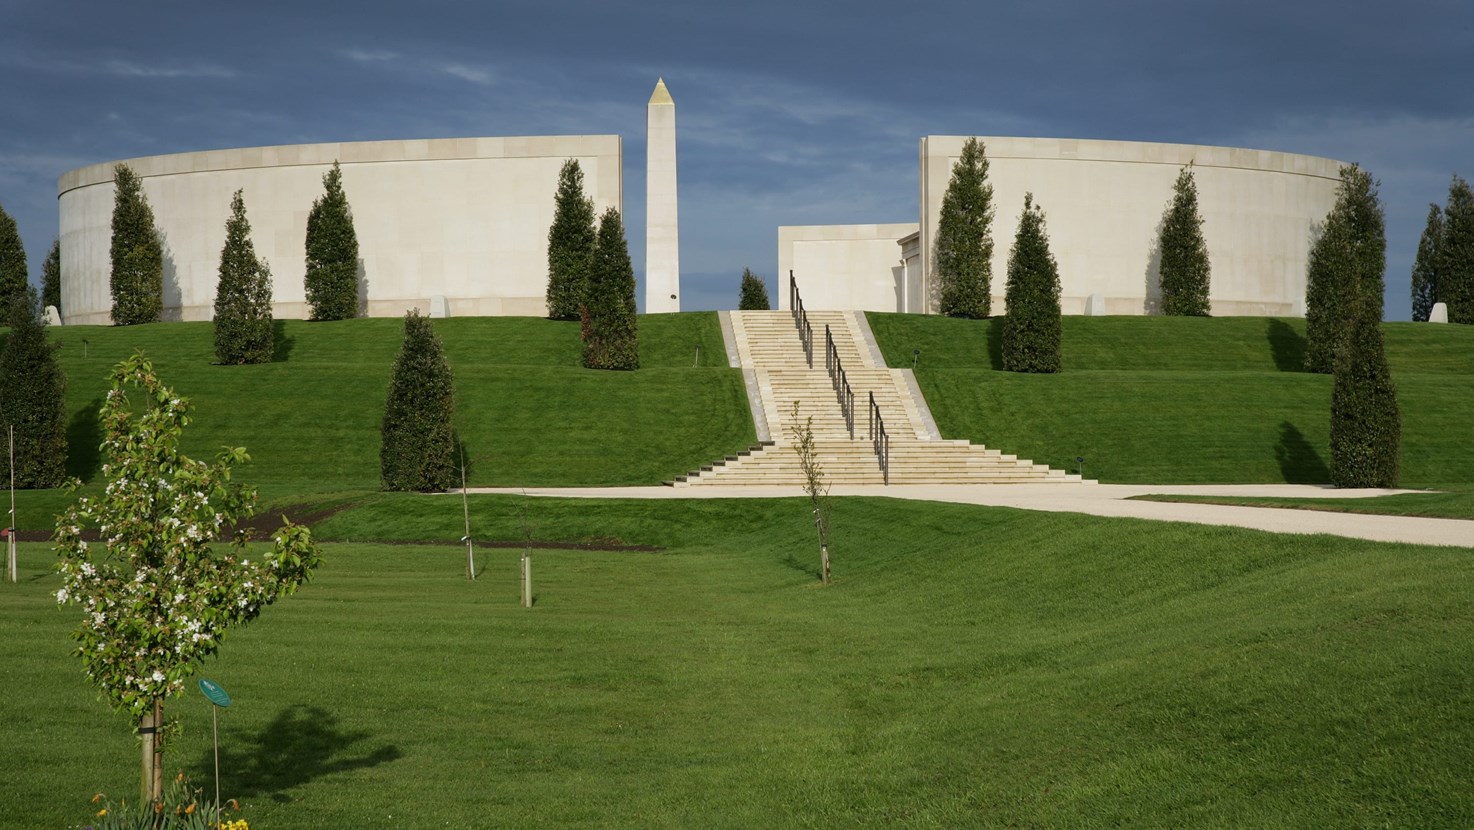 View all of the events and meetings that PCC Marc Jones attended at the National Memorial Arboretum in 2021